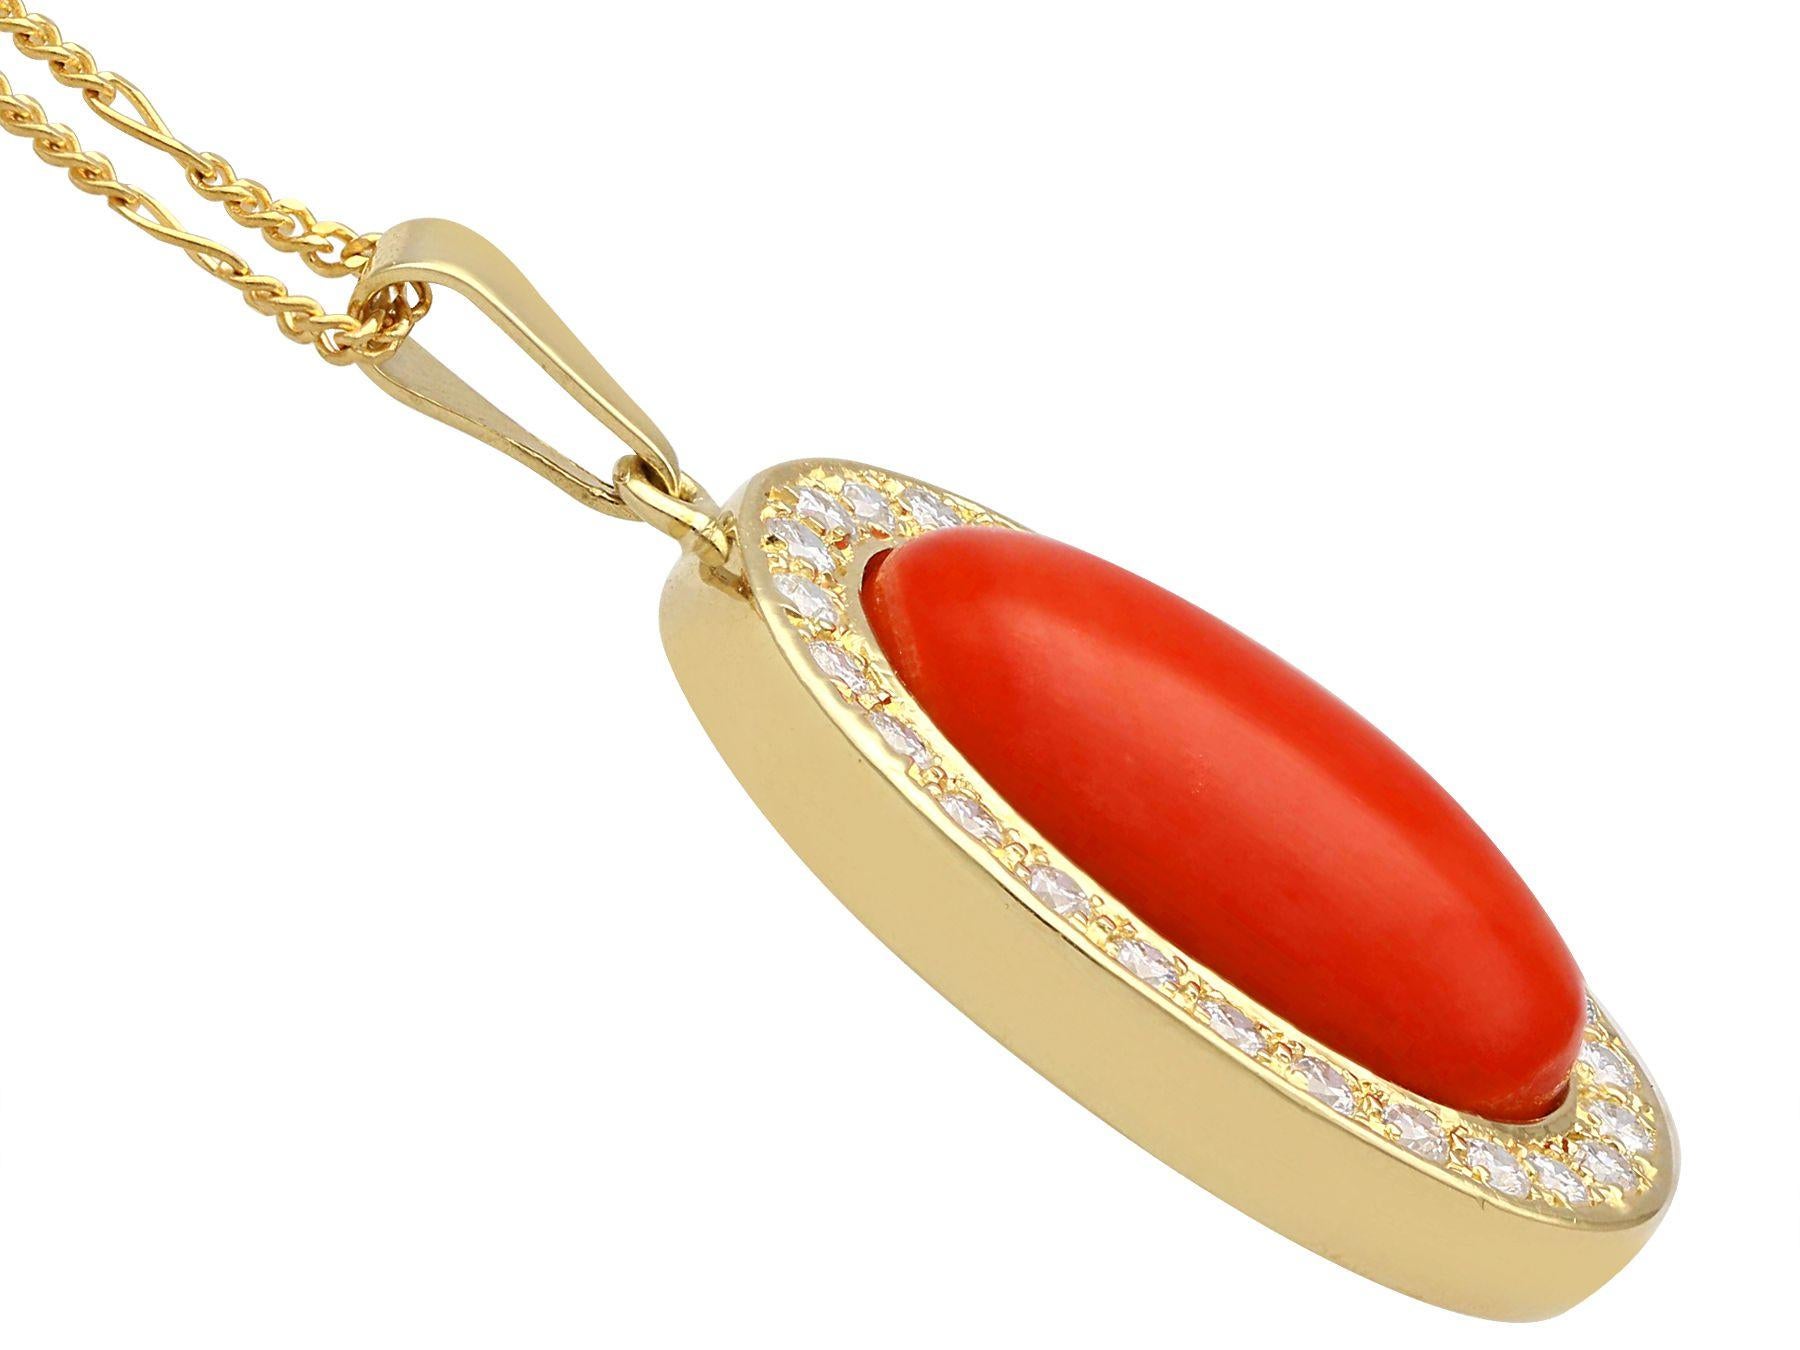 Vintage 7.93Ct Coral and 1.82Ct Diamond Yellow Gold Pendant In Excellent Condition For Sale In Jesmond, Newcastle Upon Tyne